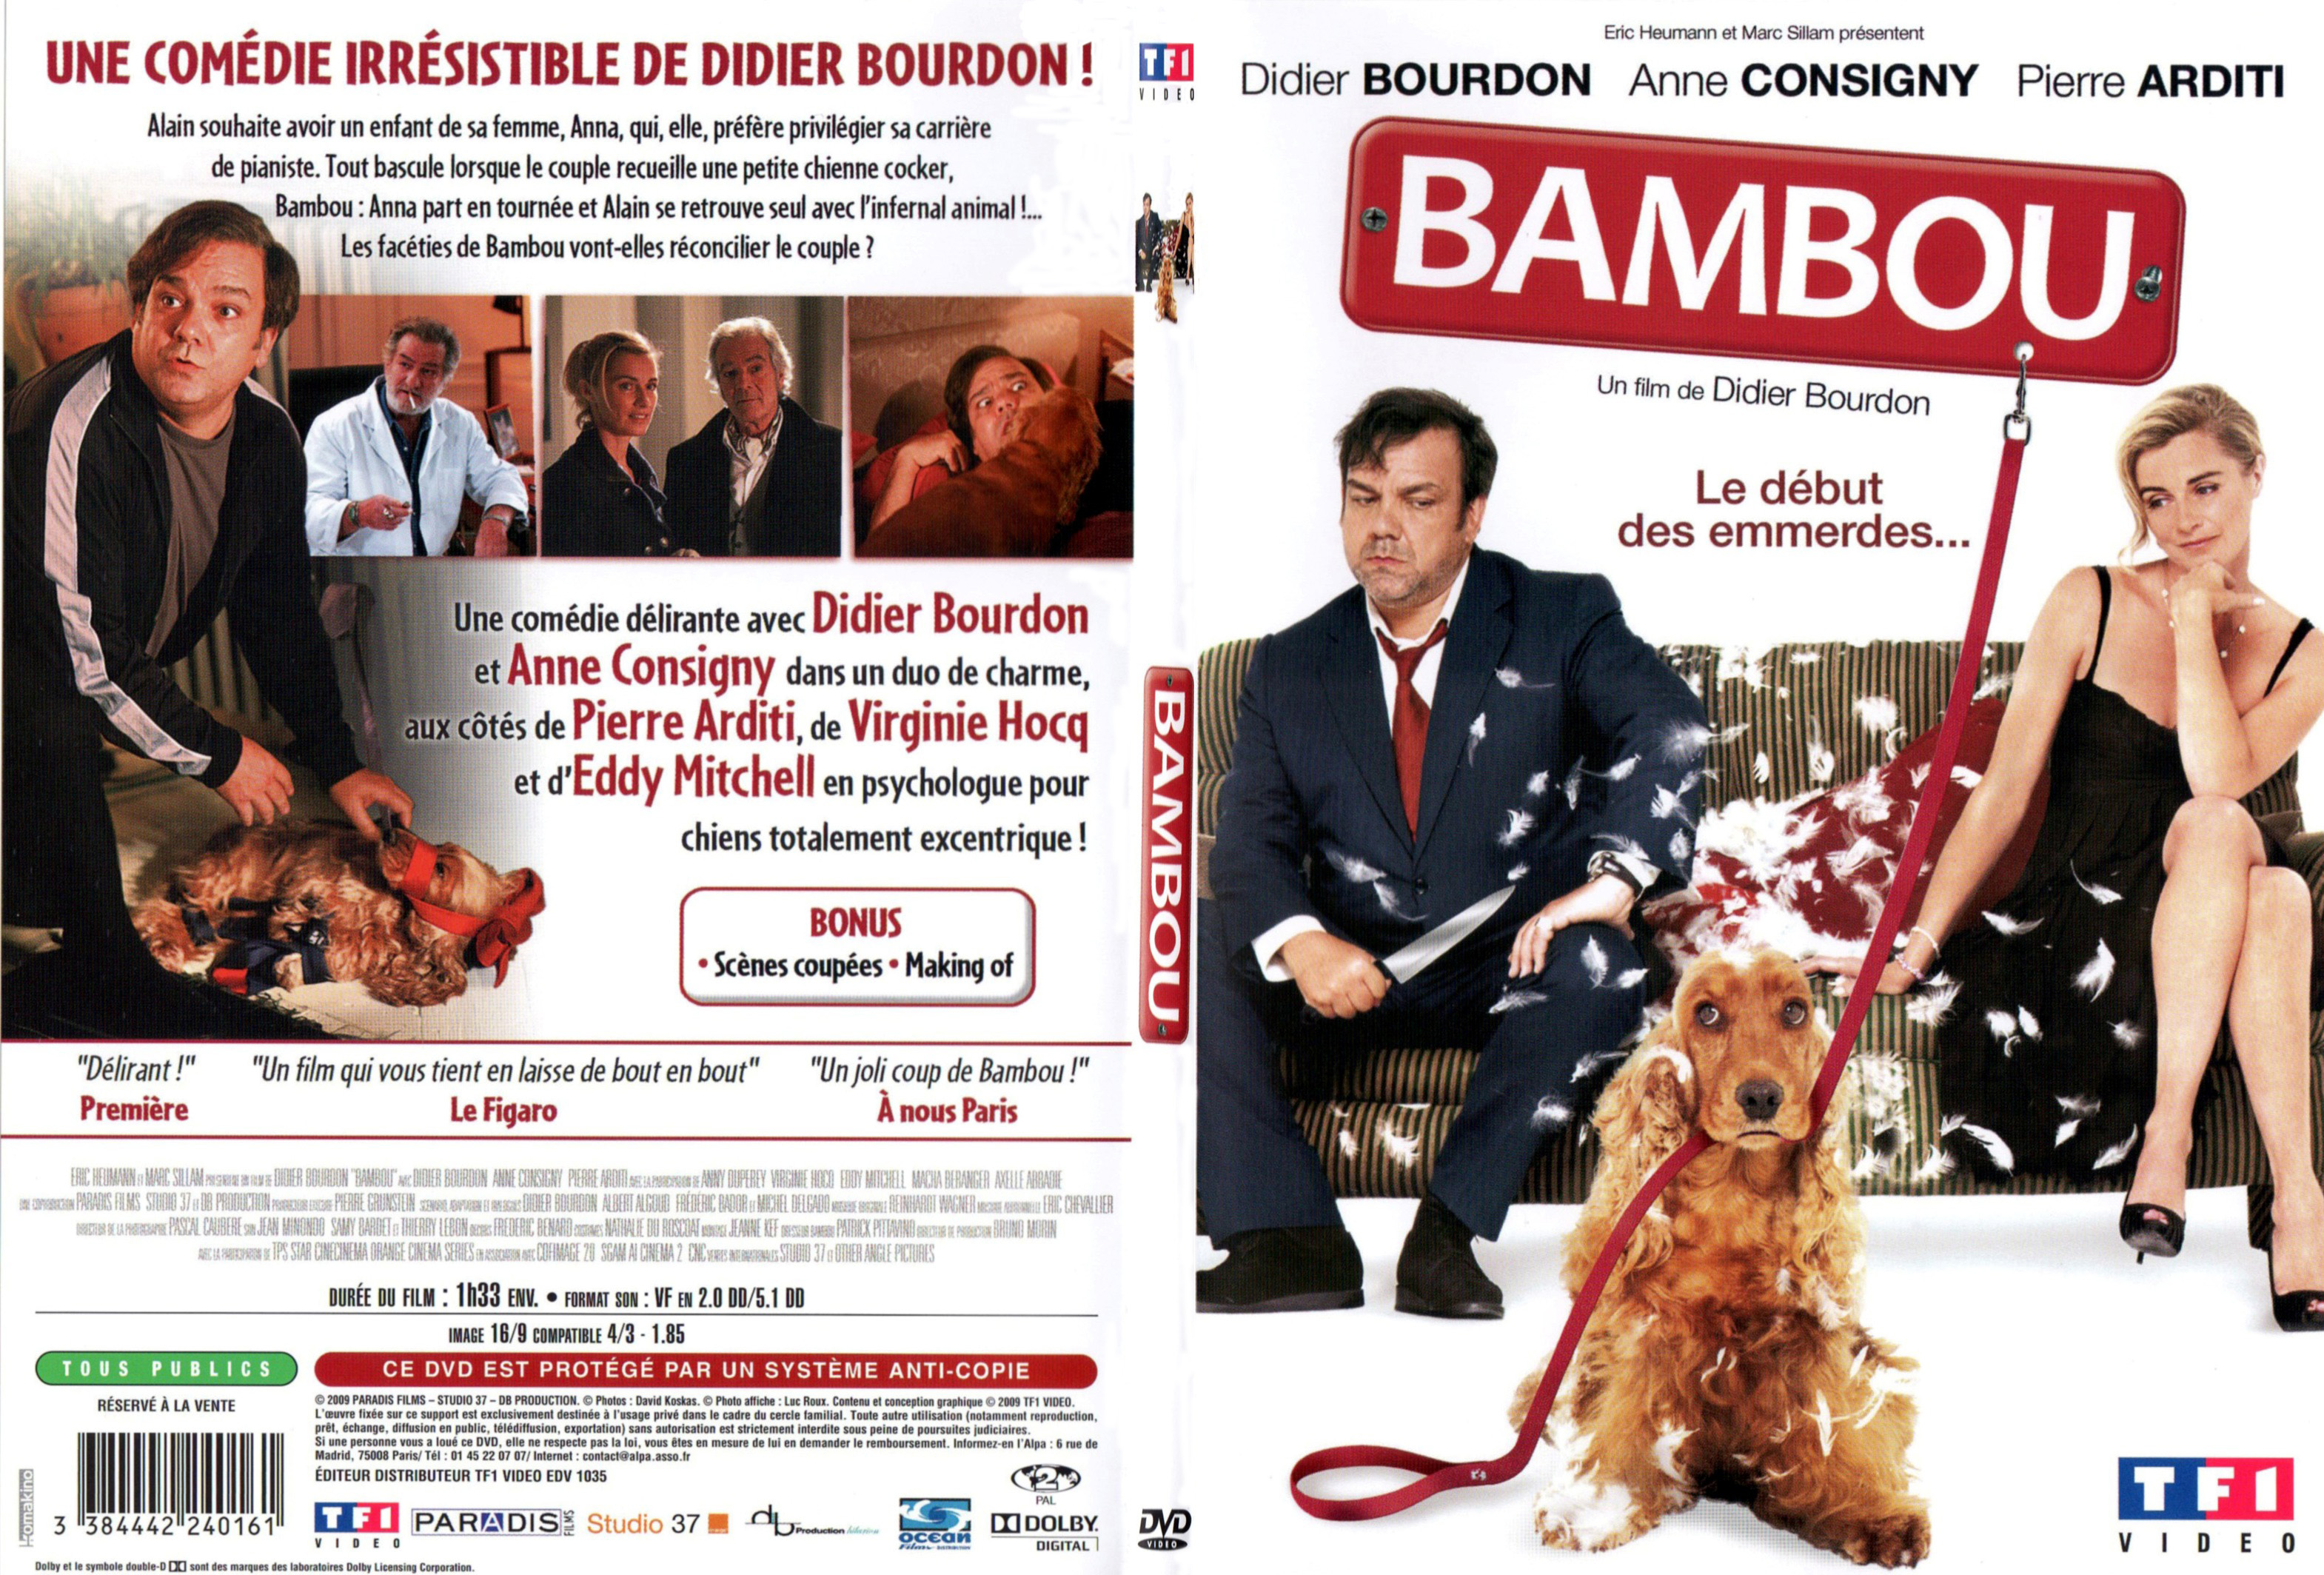 Jaquette DVD Bambou - SLIM